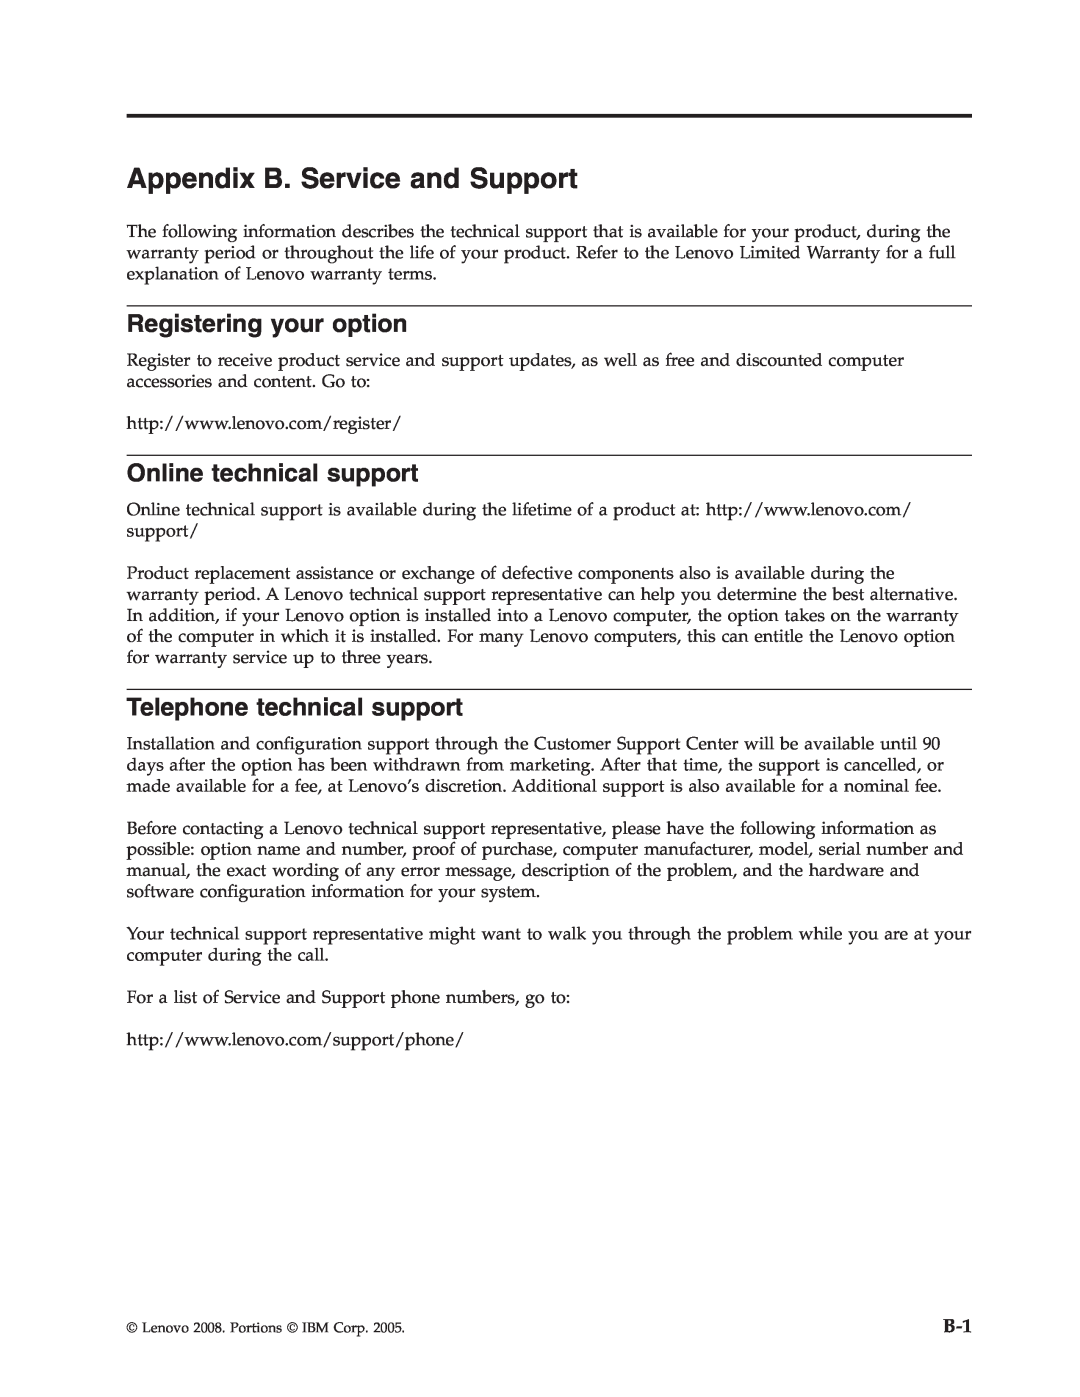 Lenovo 43N3224 manual Appendix B. Service and Support, Registering your option, Online technical support 